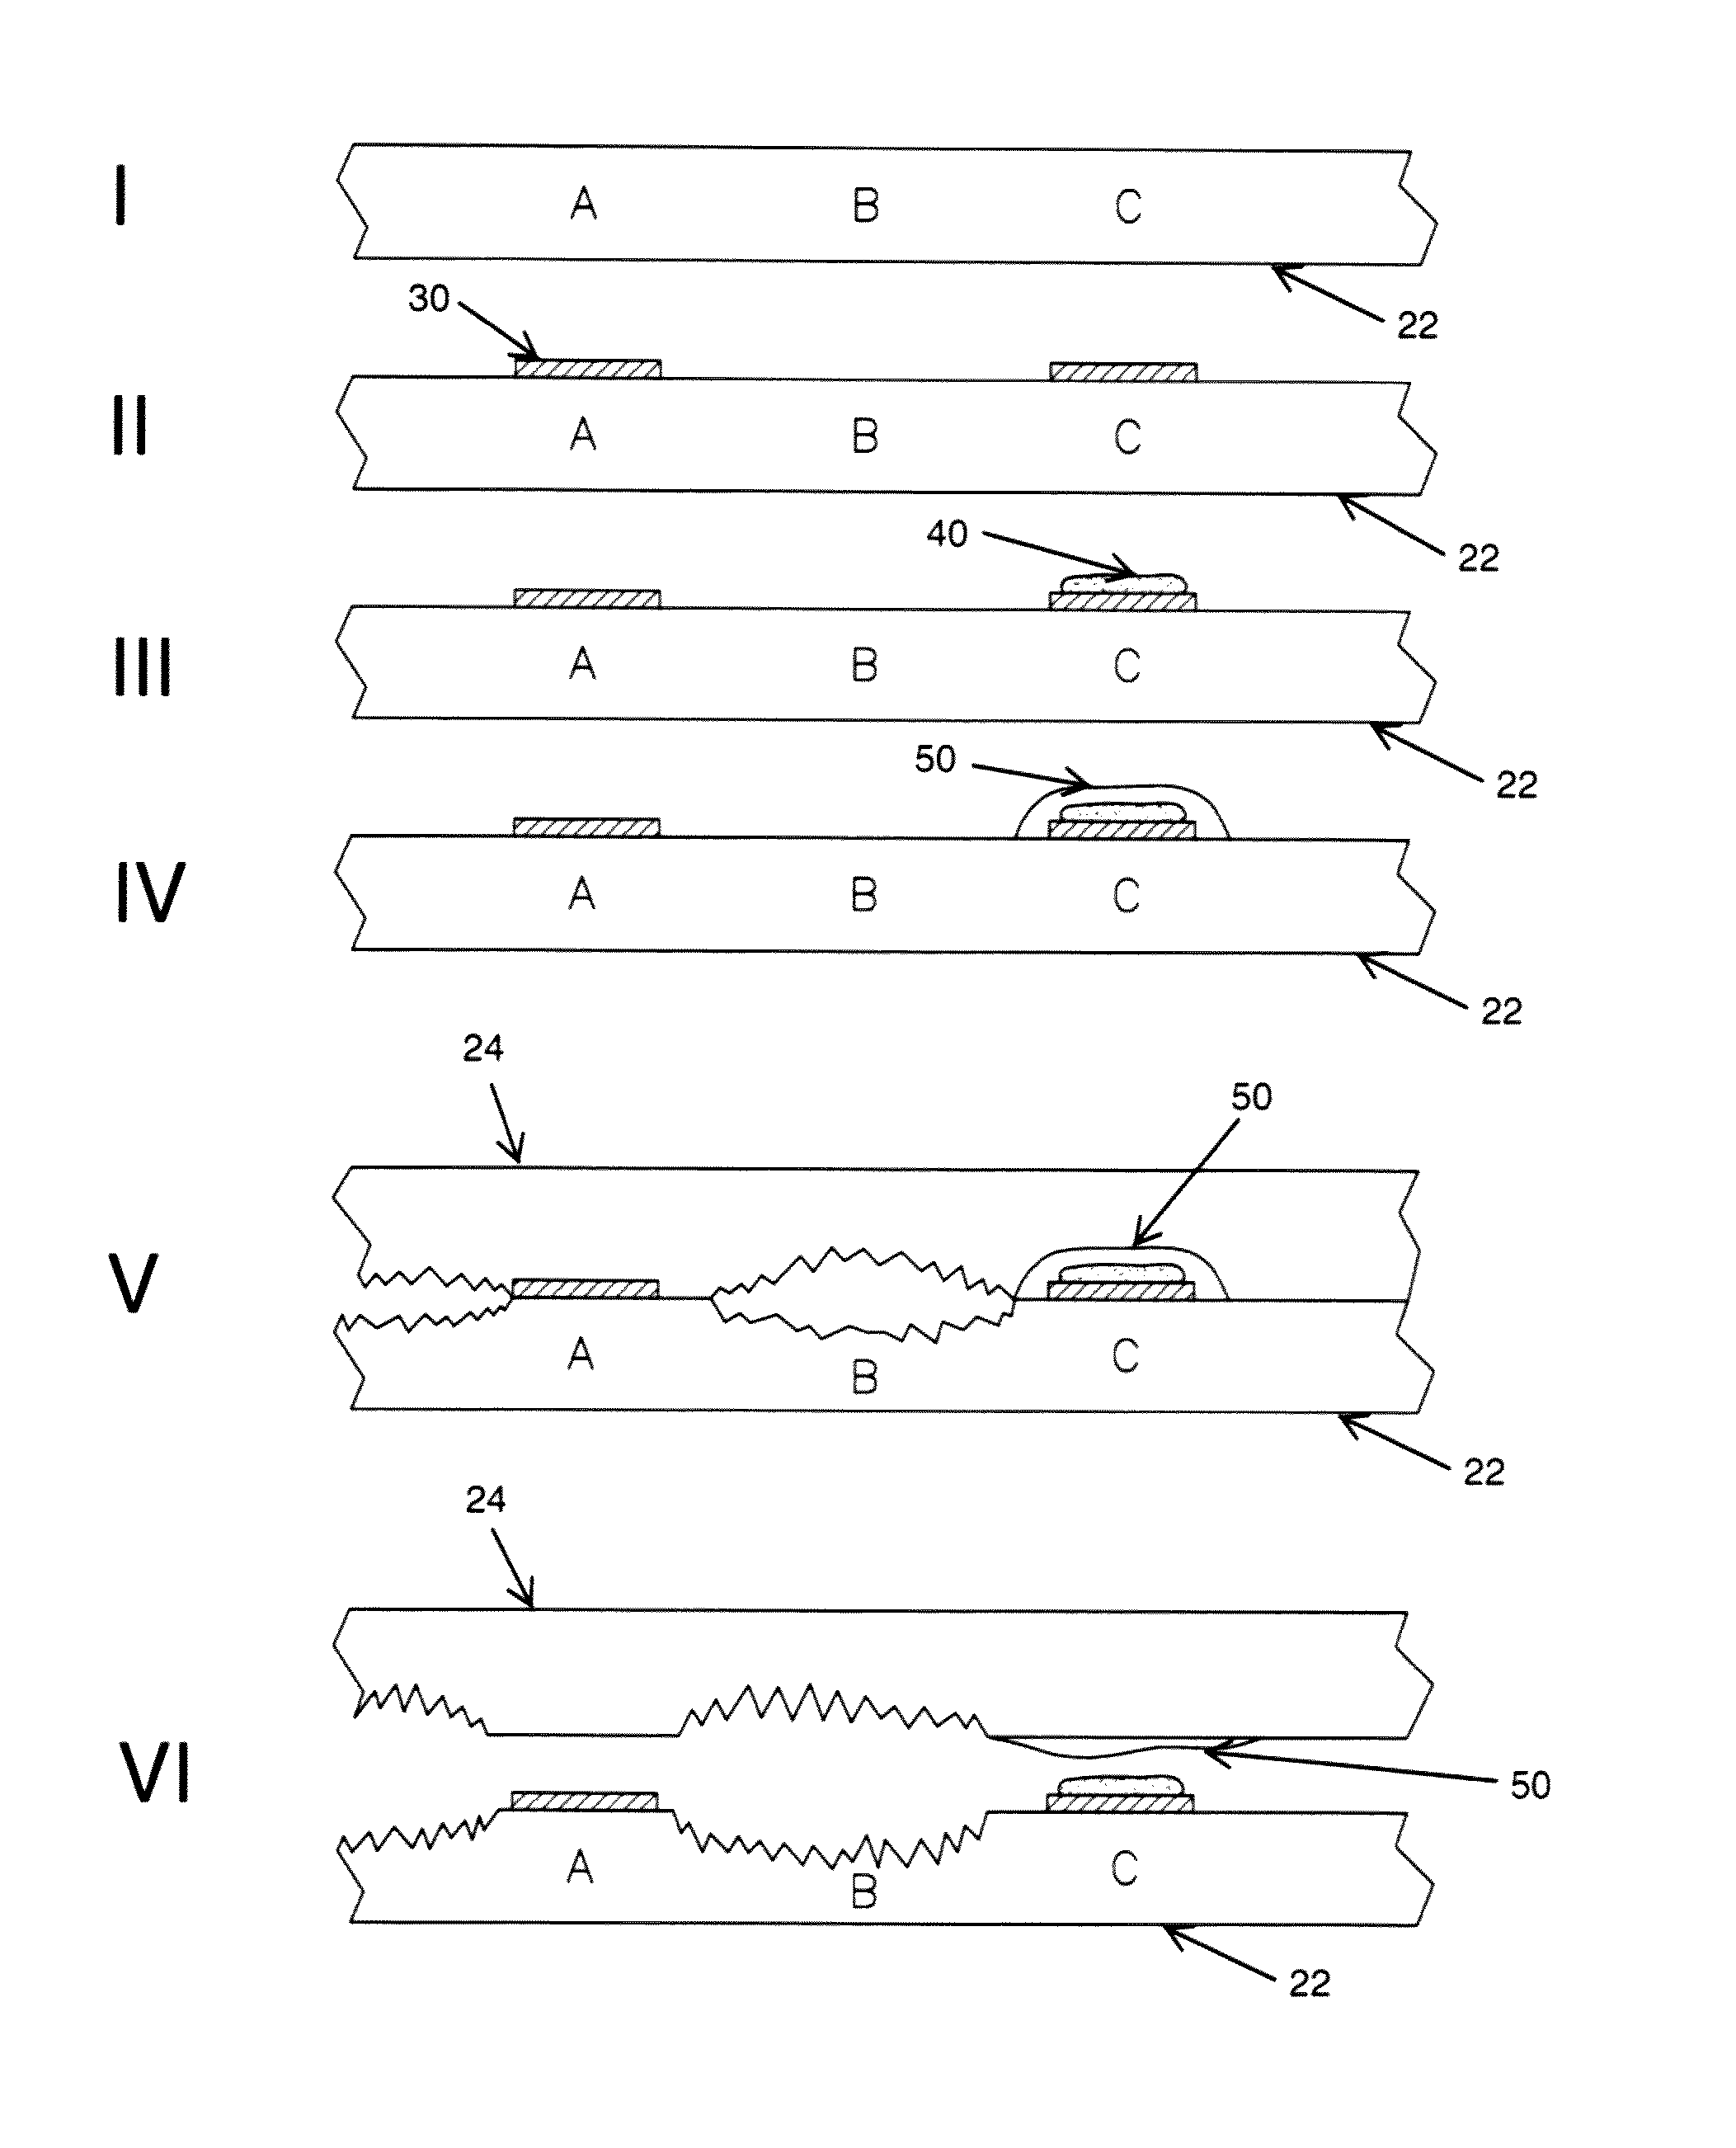 Thermo-sealing control method and packaging for resealable packaging